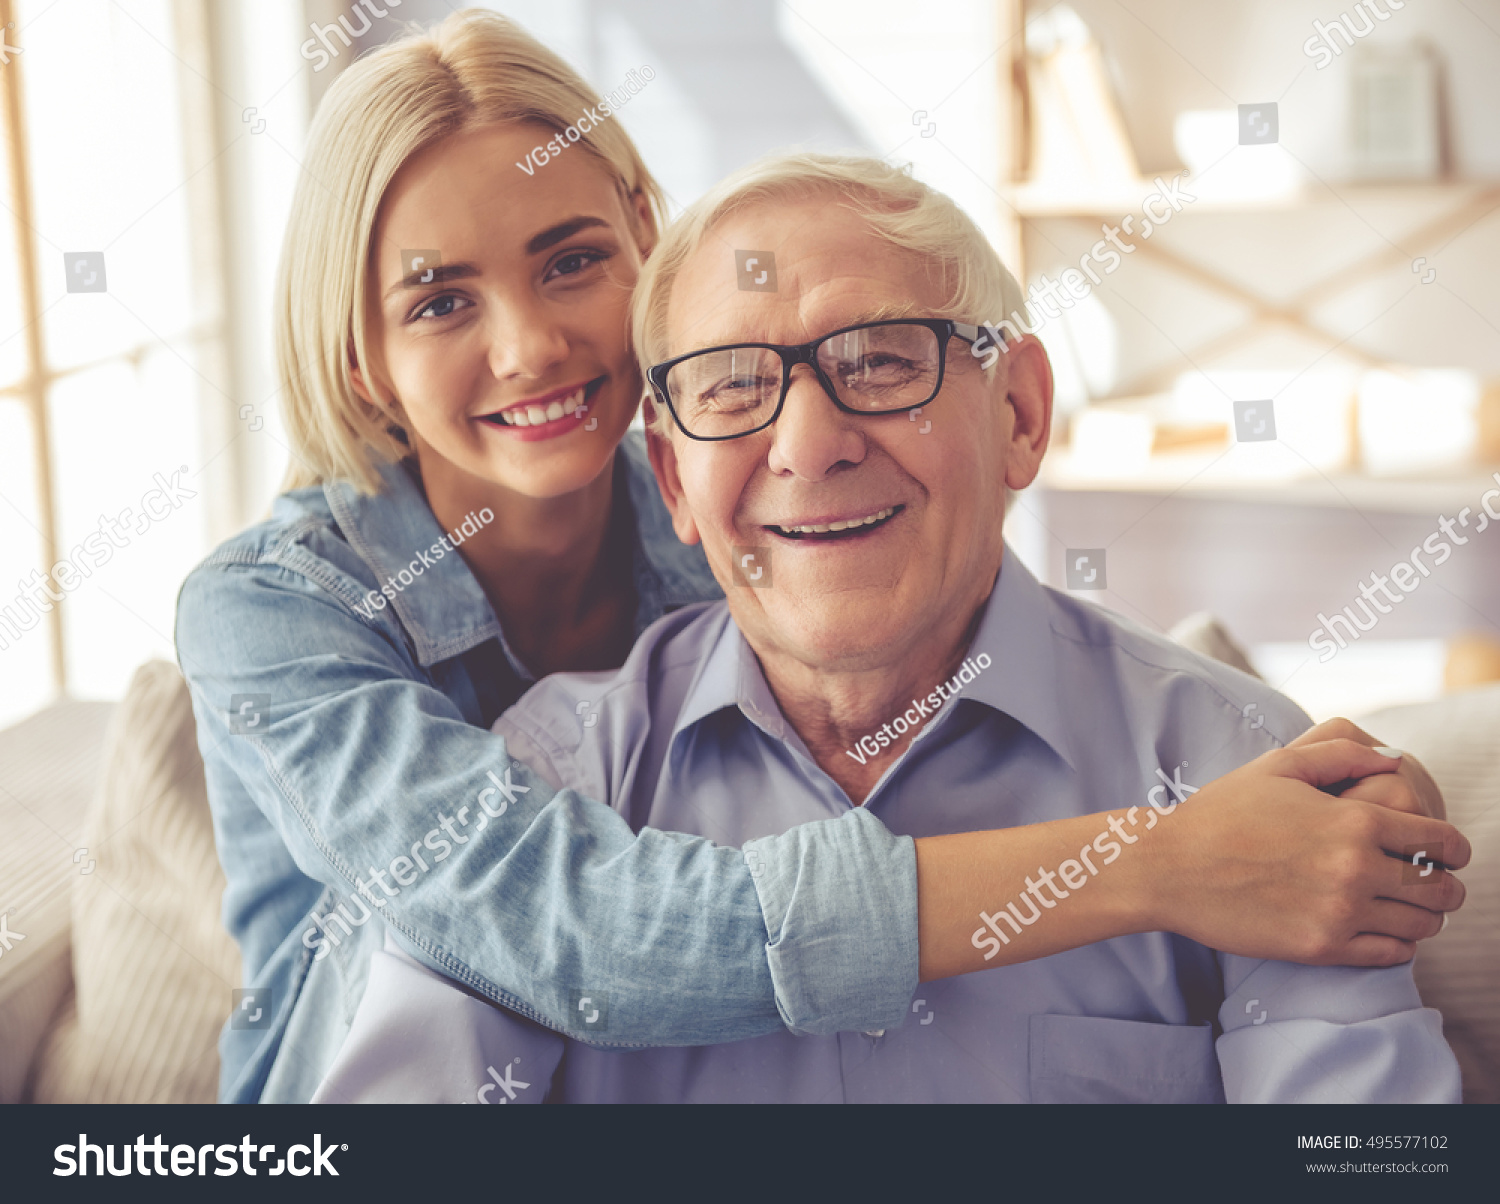 Handsome Old Man Beautiful Young Girl picture